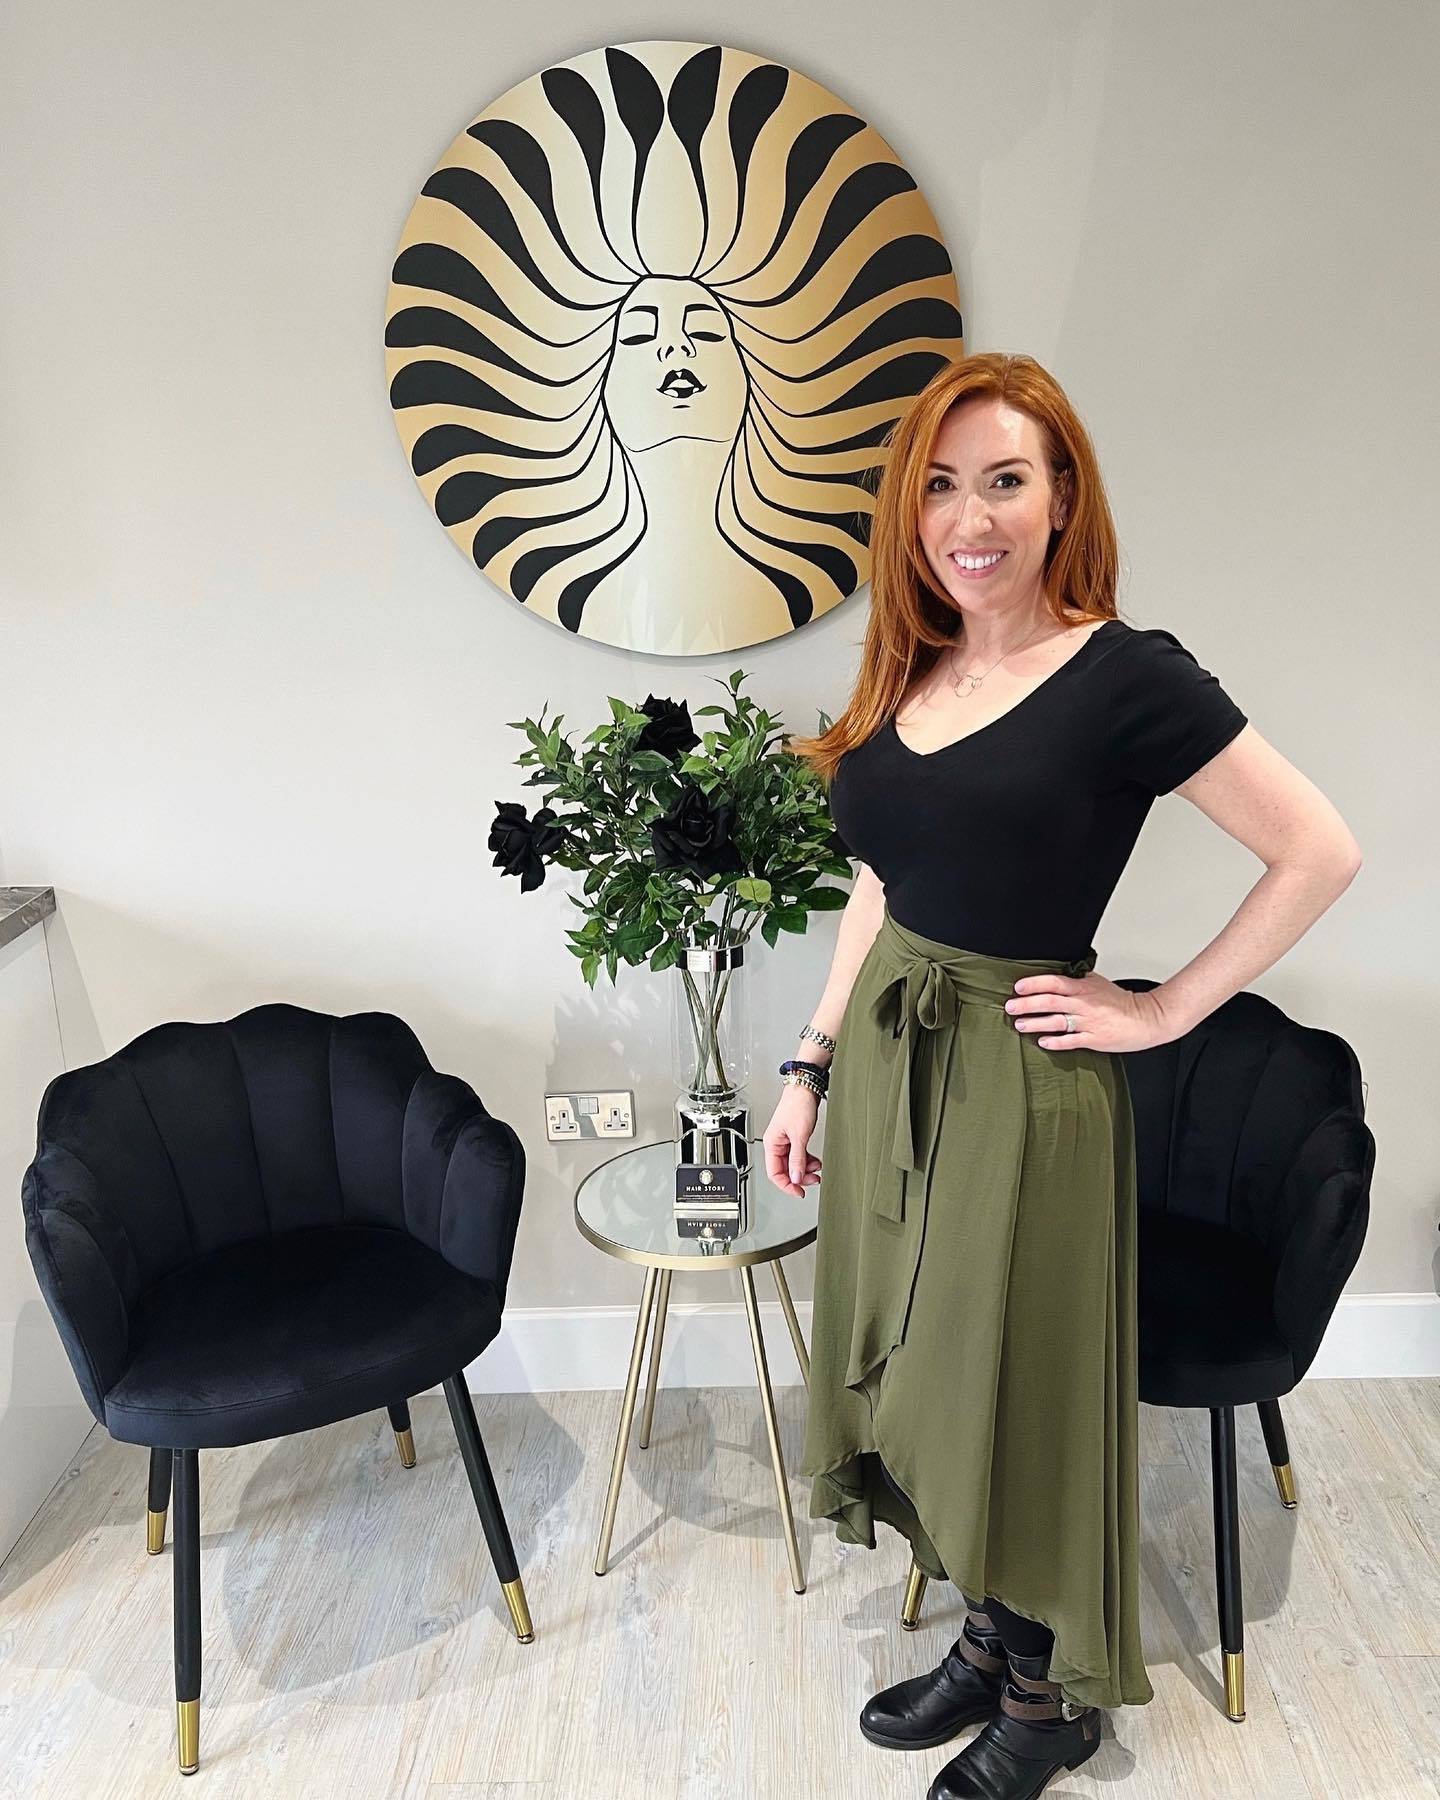 Jacqueline has been in the hair and beauty industry for nearly 30 years